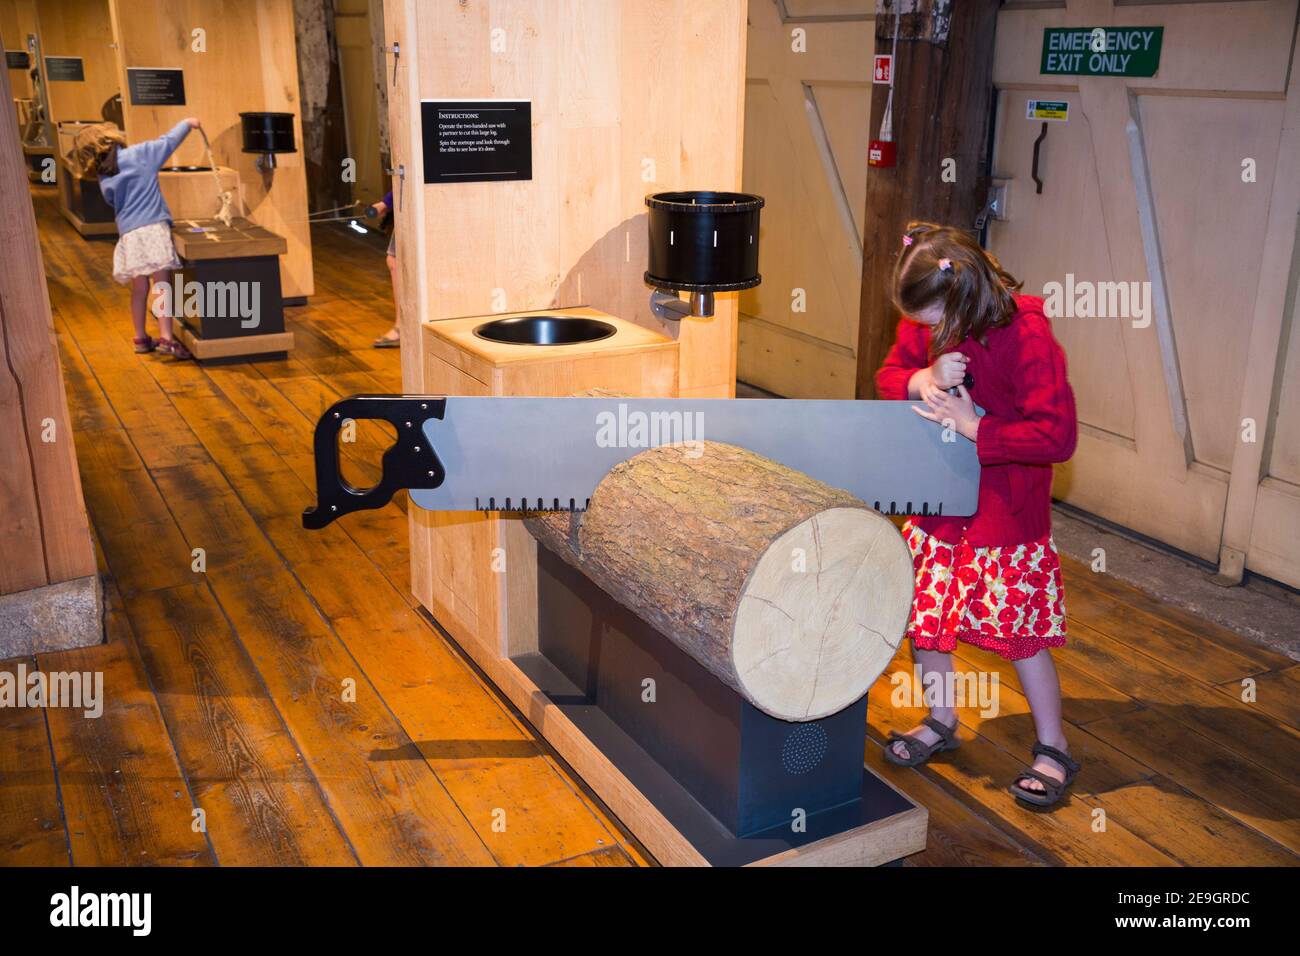 Young girl / child / children / kid / kids / tourist interacting and playing with interactive soaring timber and wood for masts for ships, display and displays part of the 'Command of the Ocean Gallery' at the Historic Dockyards in Chatham, Kent UK (121) Stock Photo